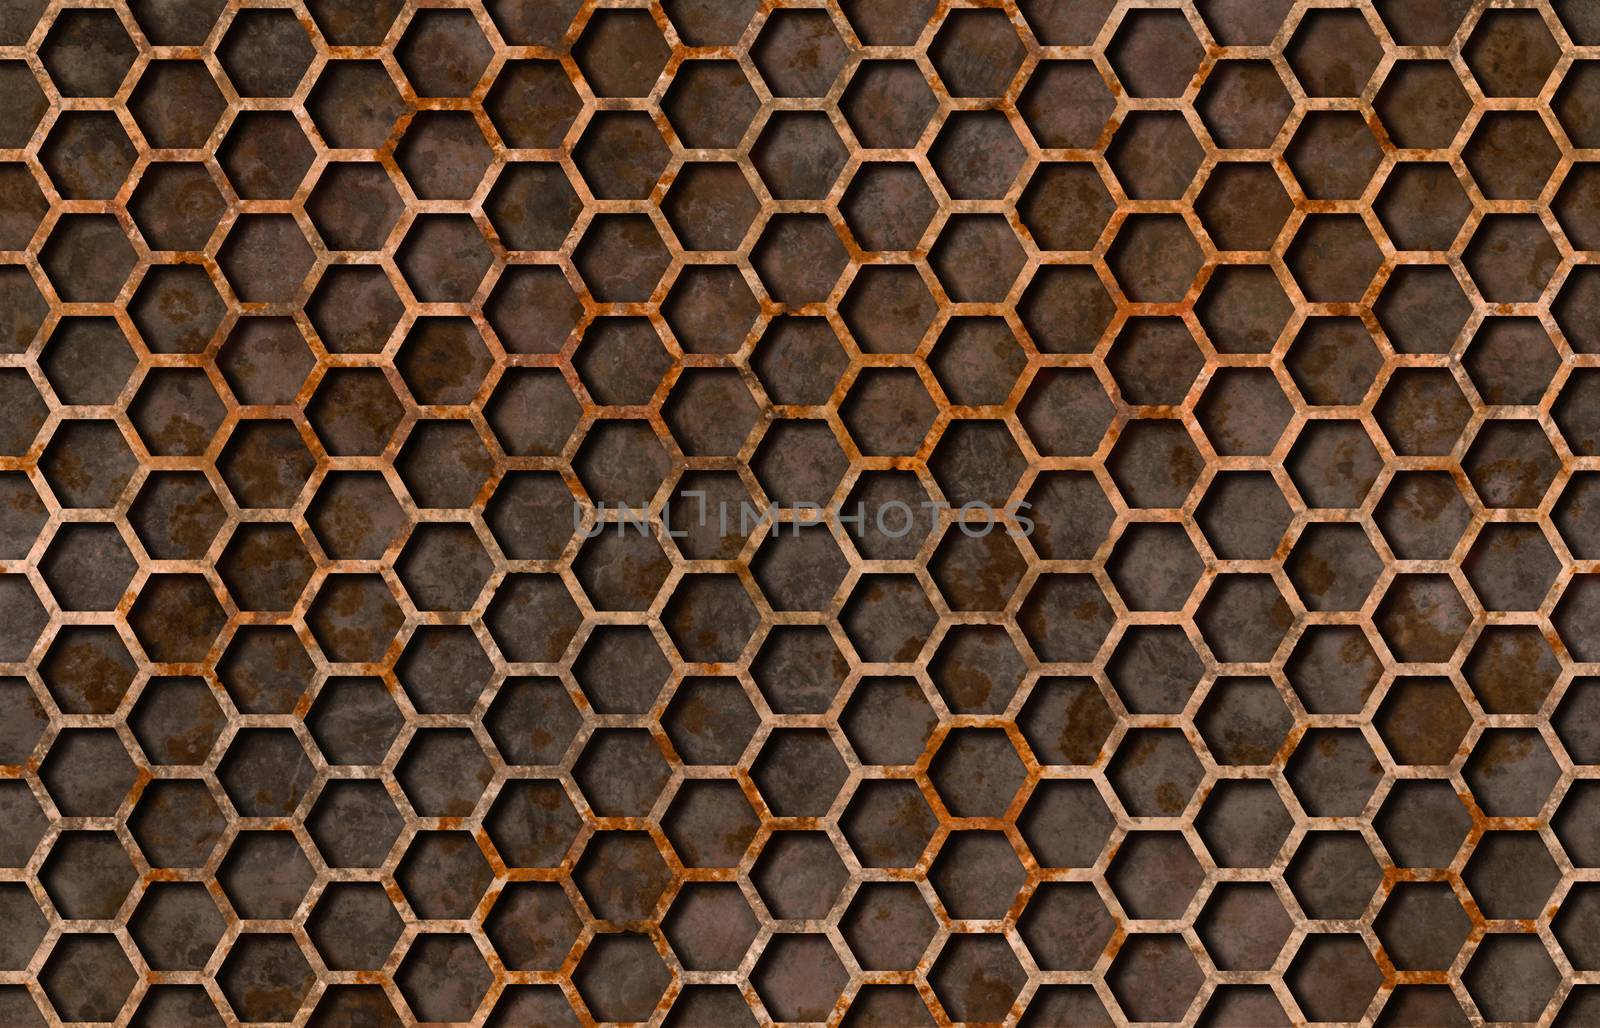 Rusty hexagon pattern grate texture background seamlessly tileable